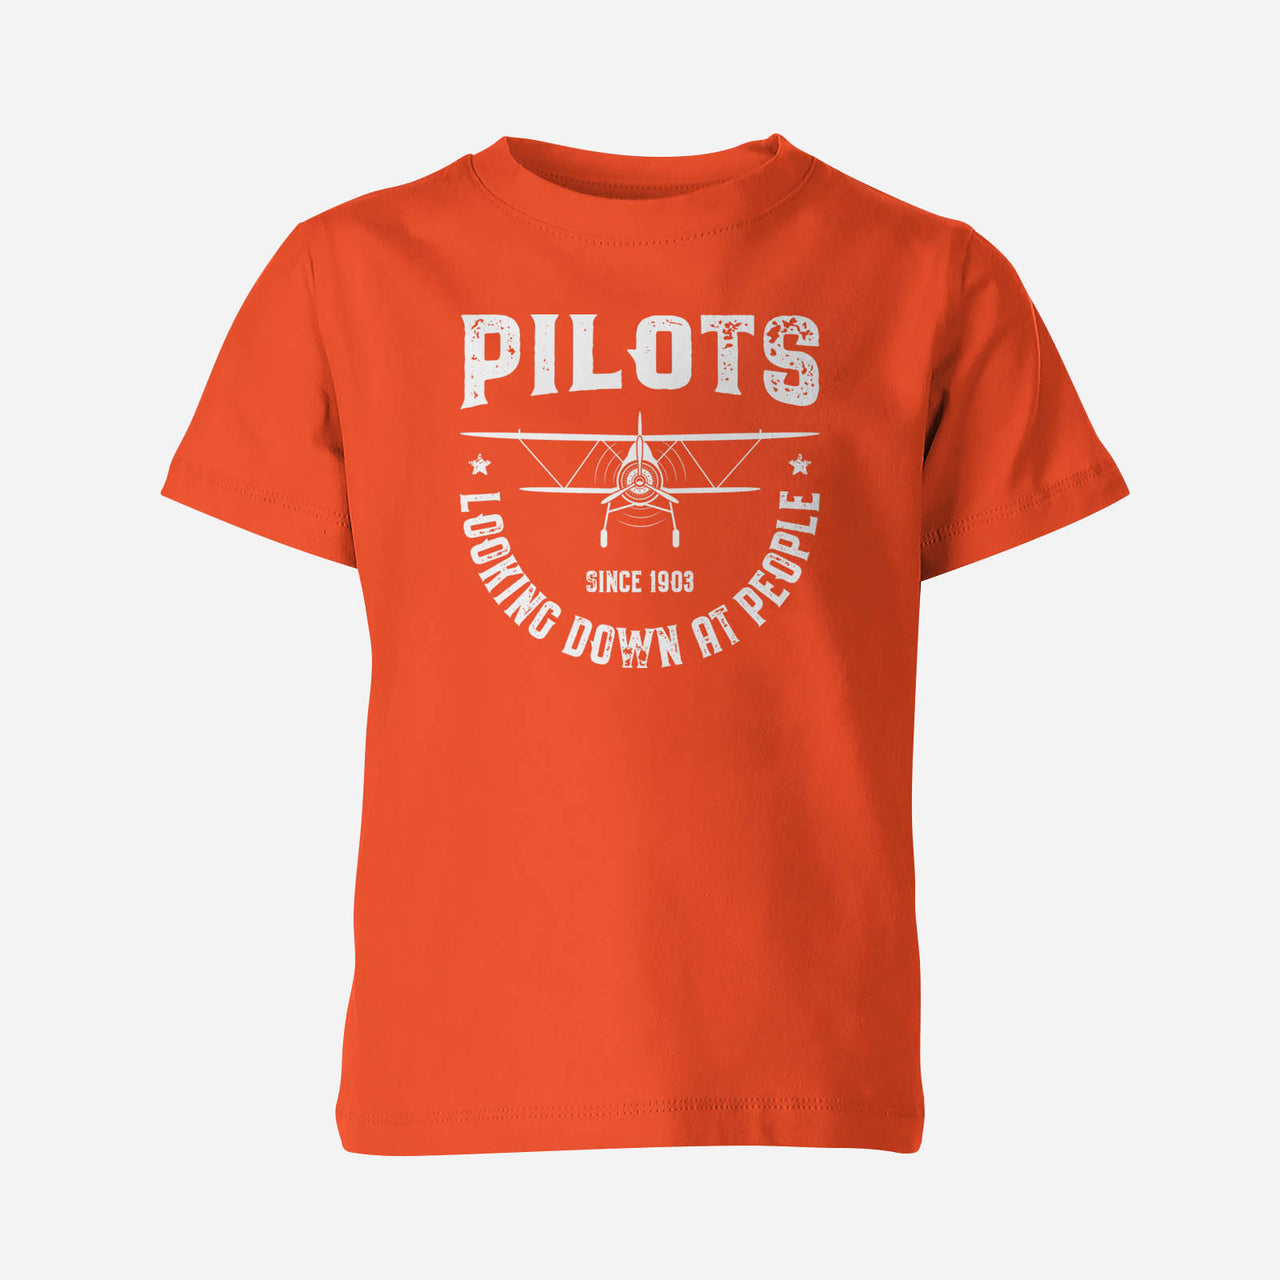 Pilots Looking Down at People Since 1903 Designed Children T-Shirts